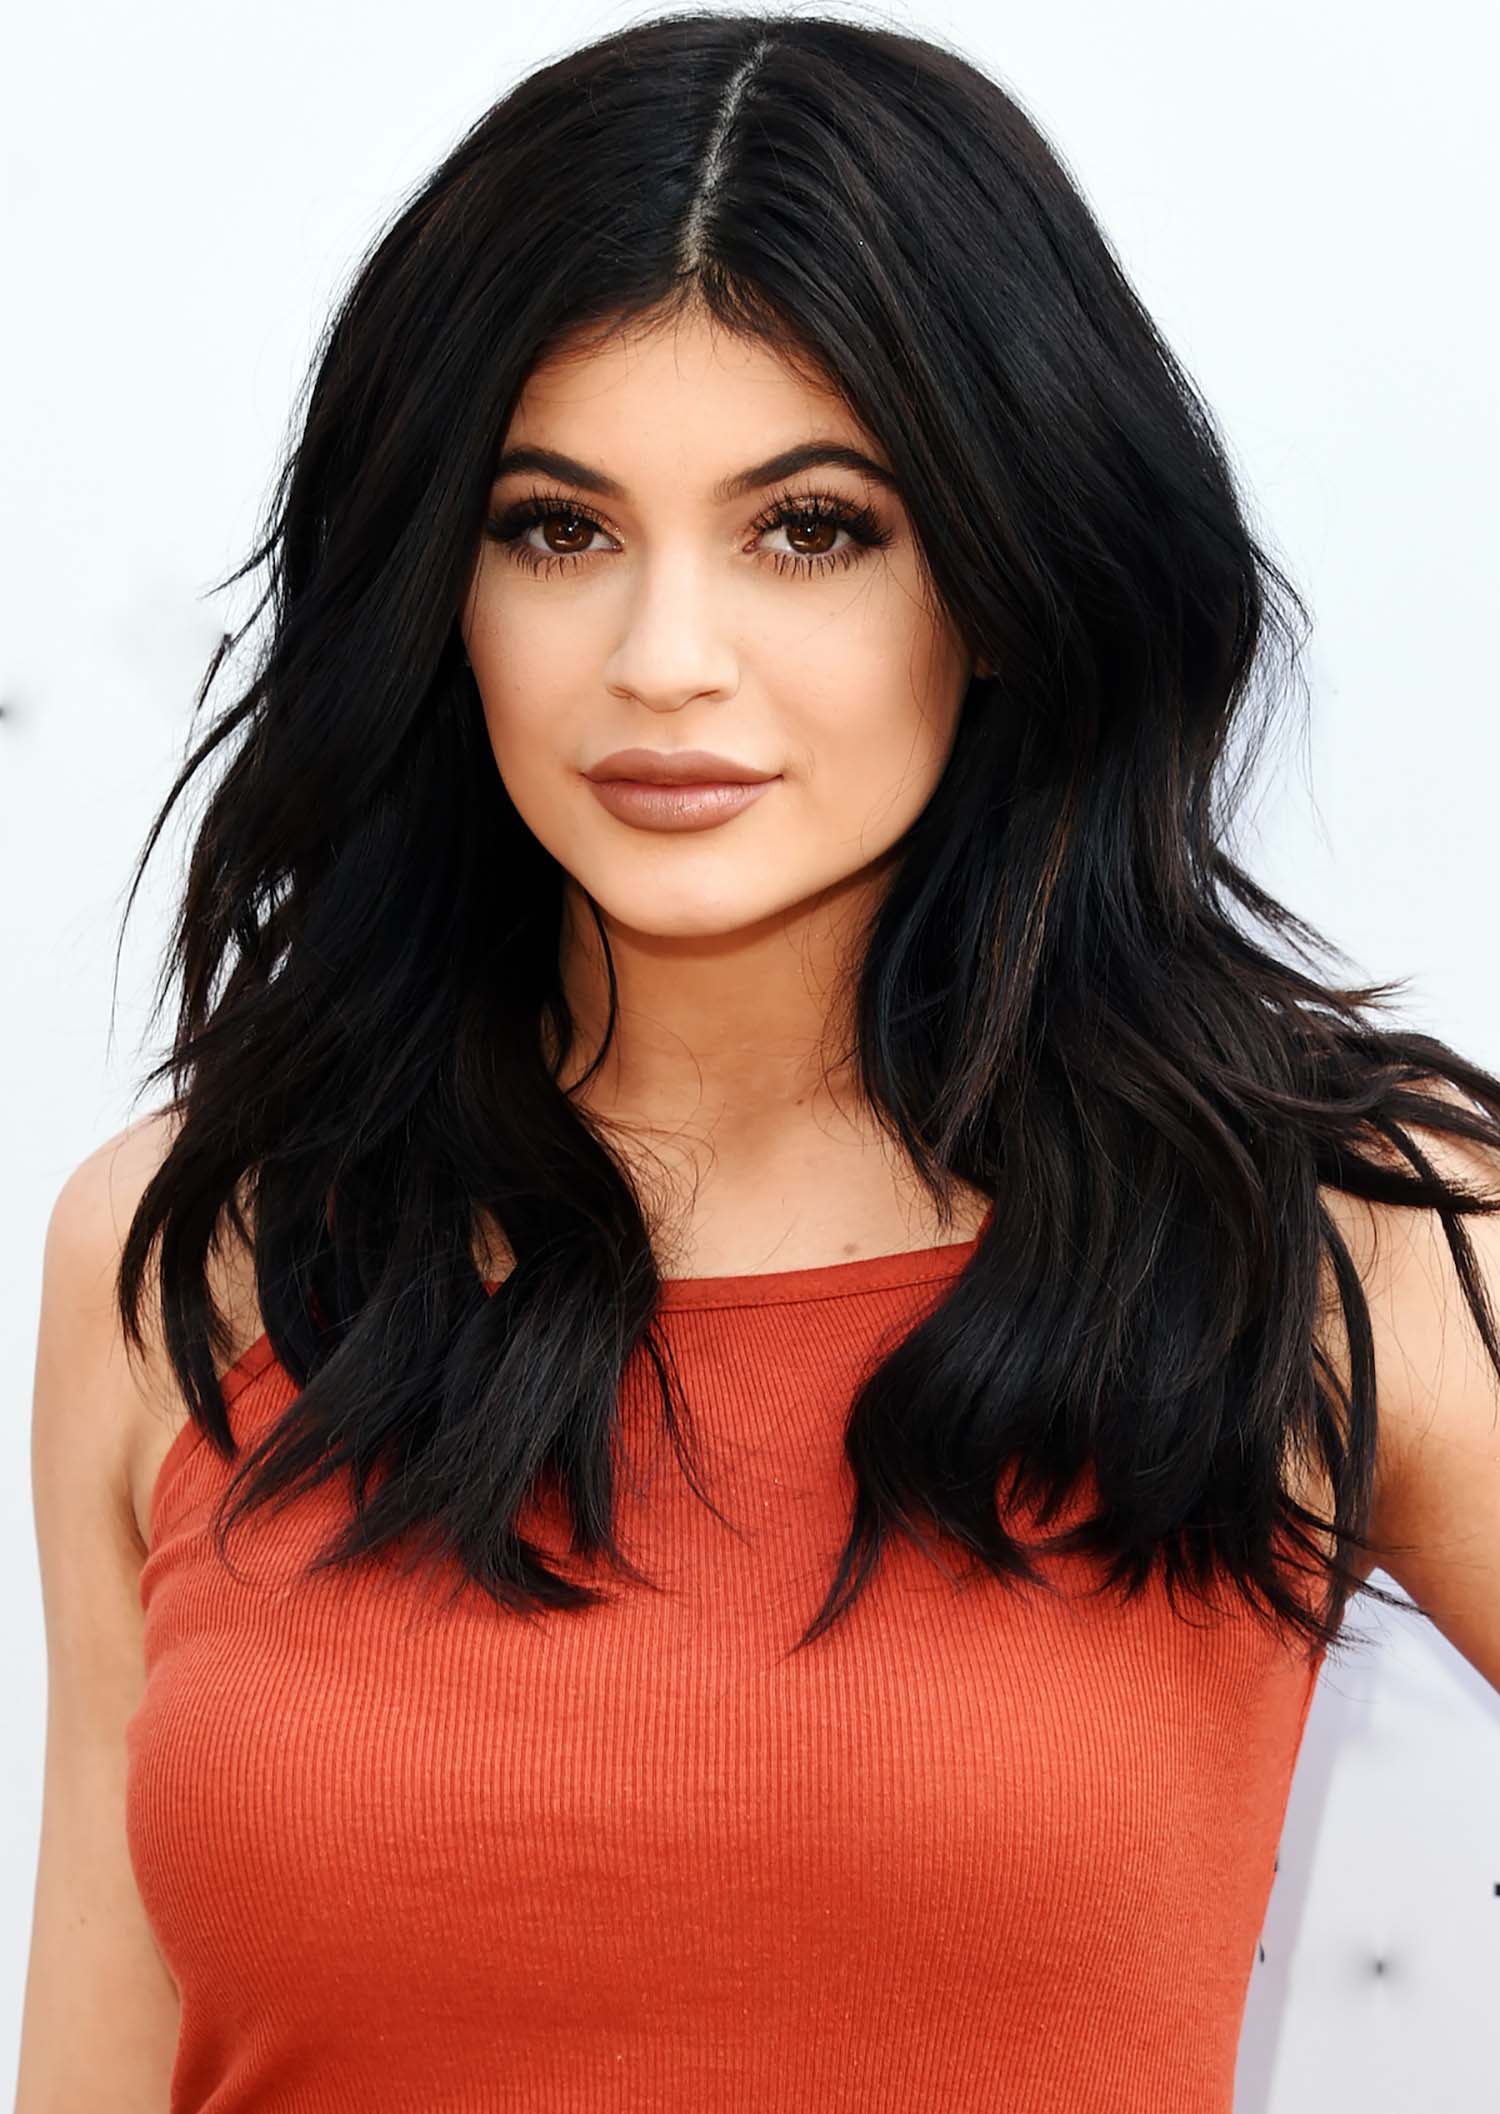 Kylie Jenner Wallpapers - Wallpaper Cave